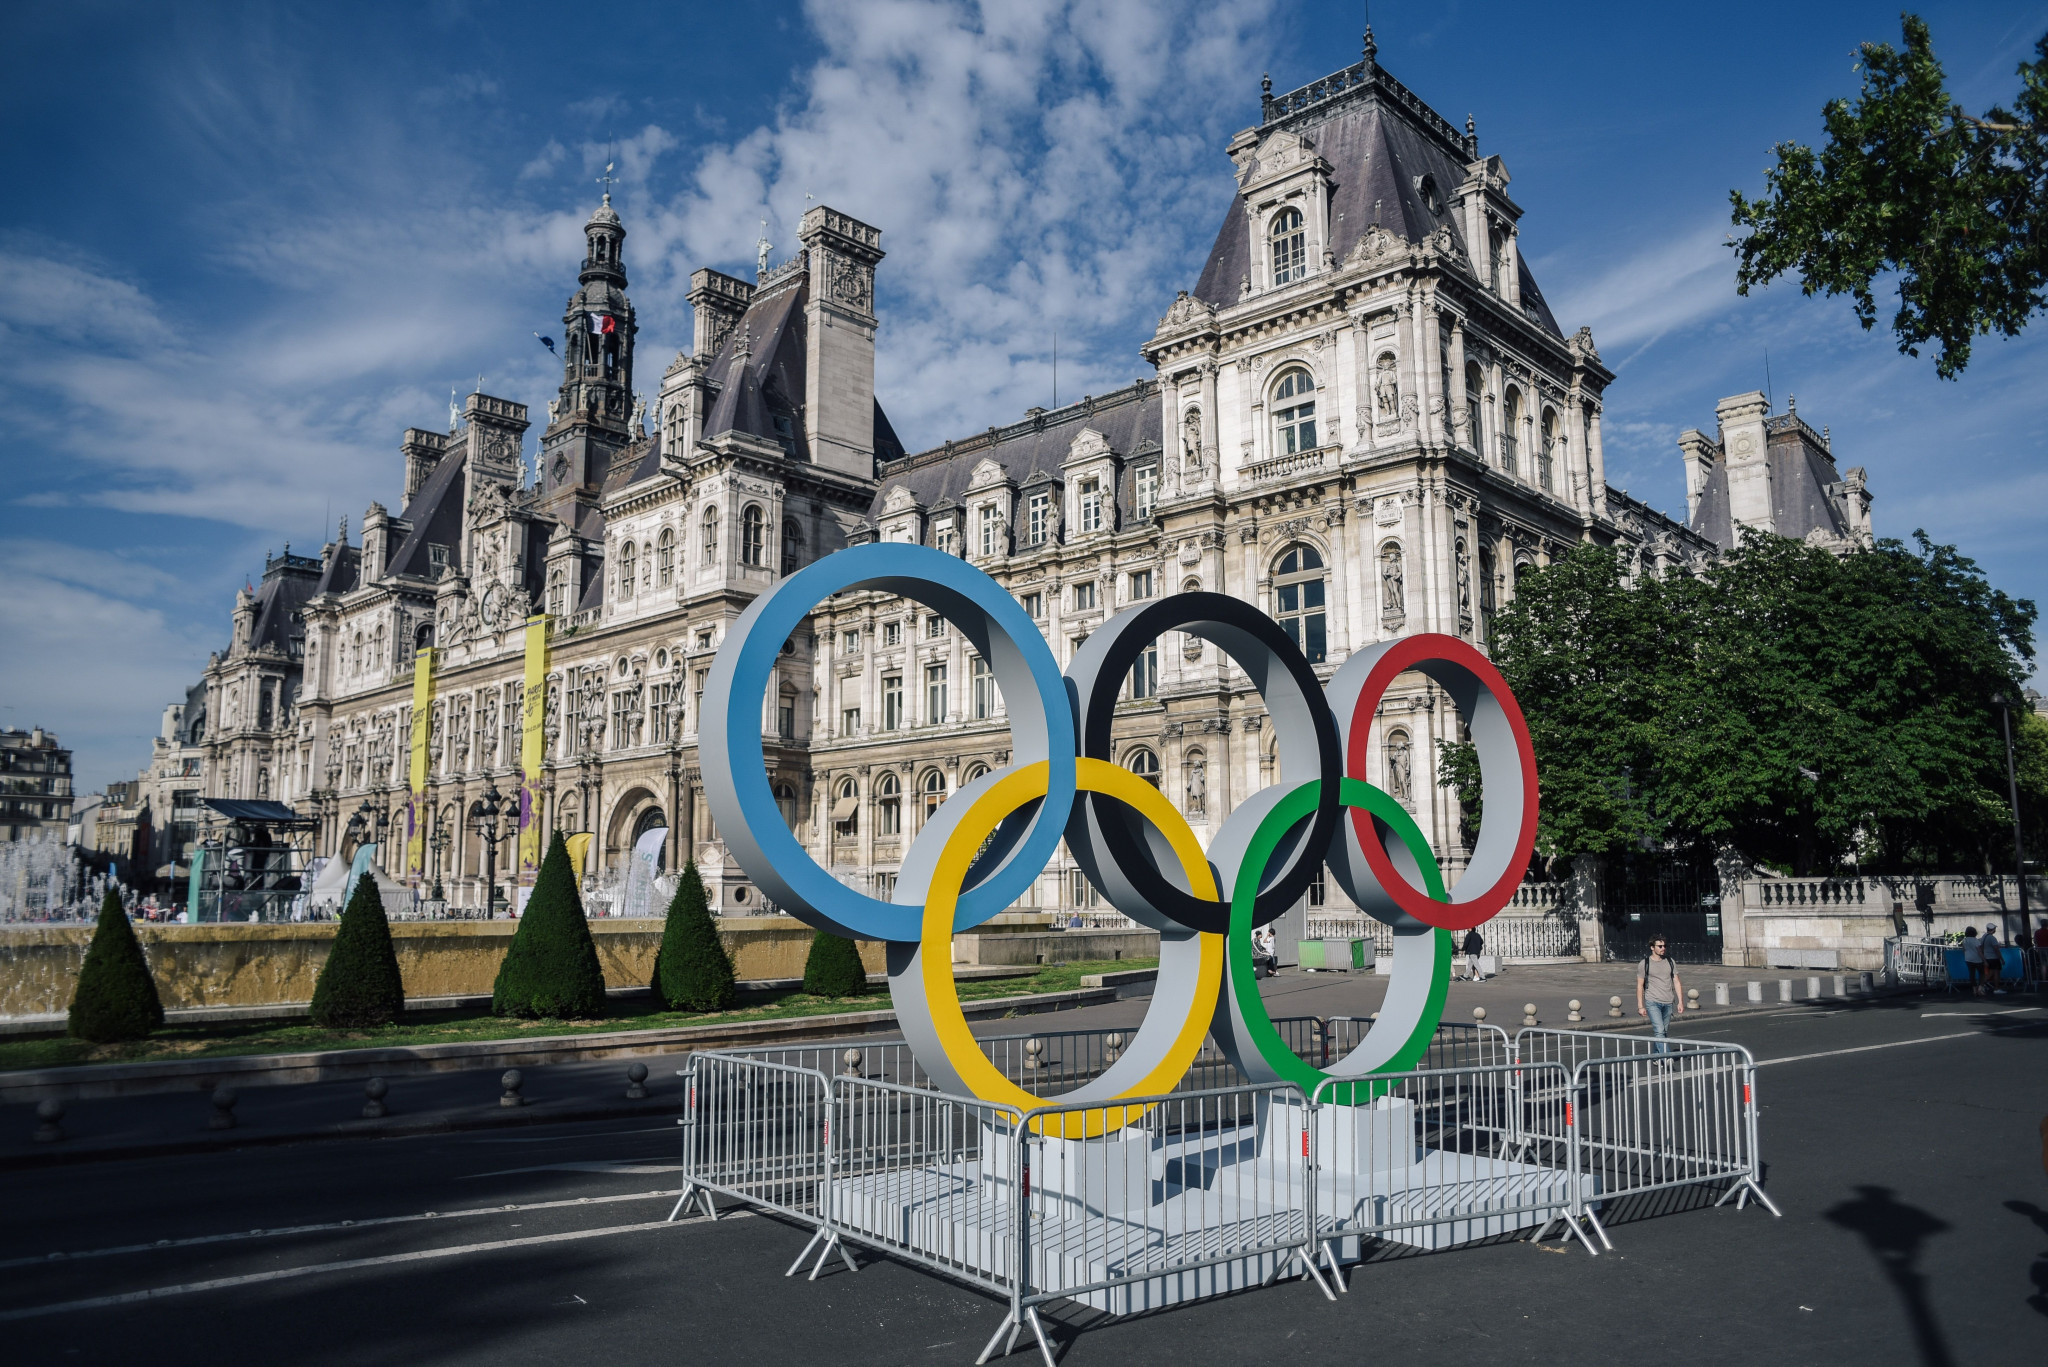 Paris 2024's progress over the past year will be discussed at the meeting ©Getty Images